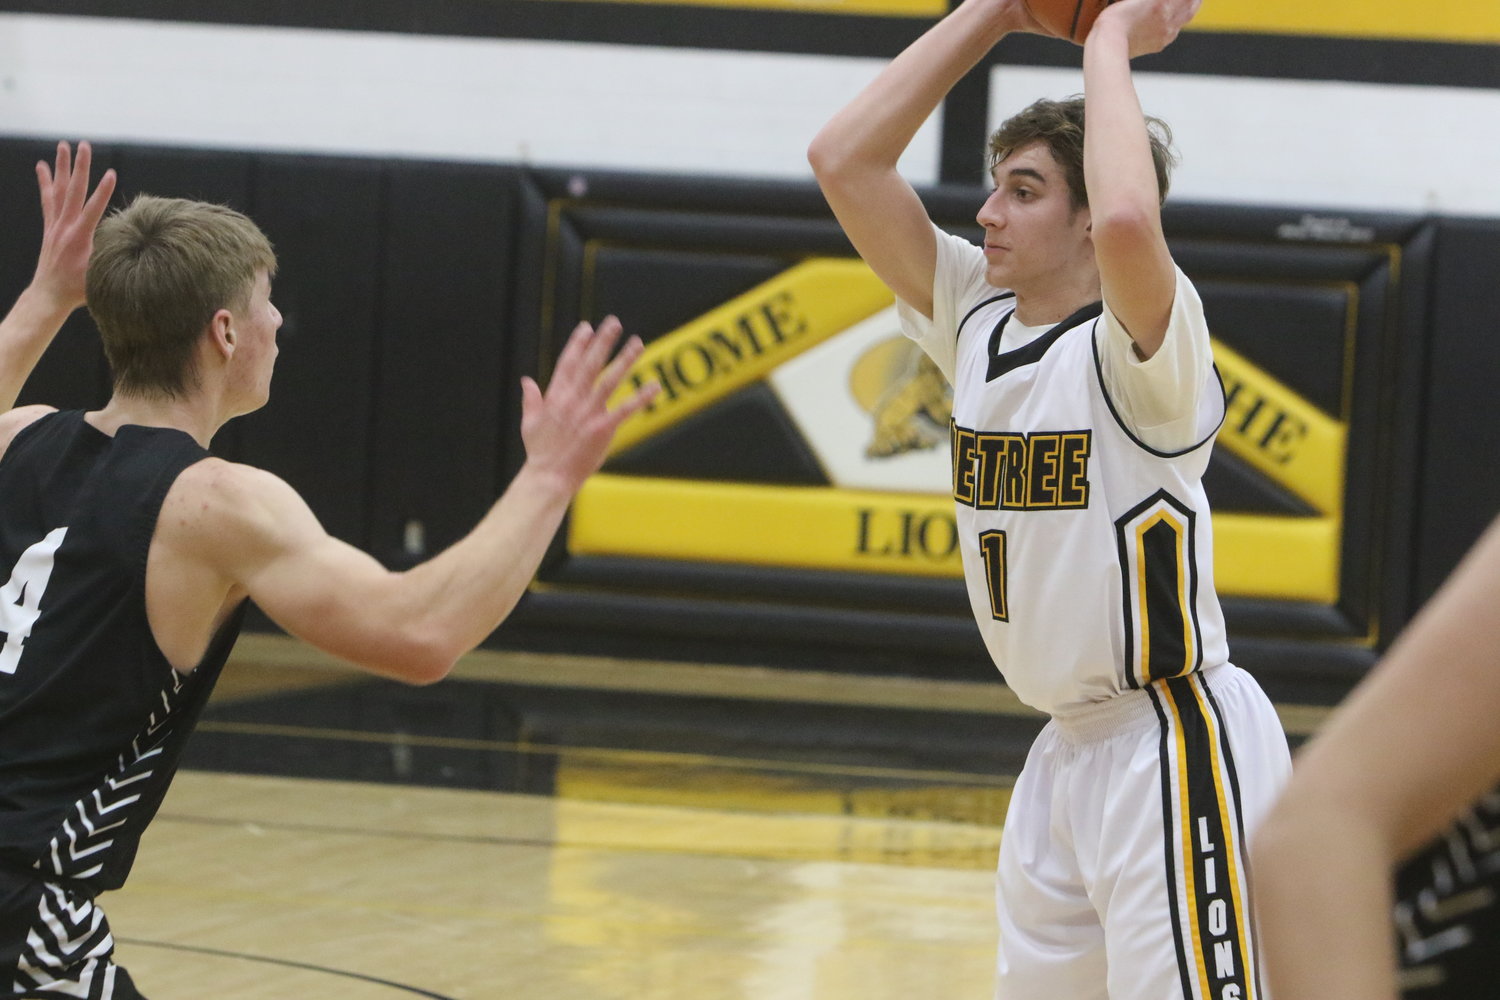 Adam Knock of Lone Tree looks to pass over Luke Schrock in Tuesday night's game against Hillcrest Academy.